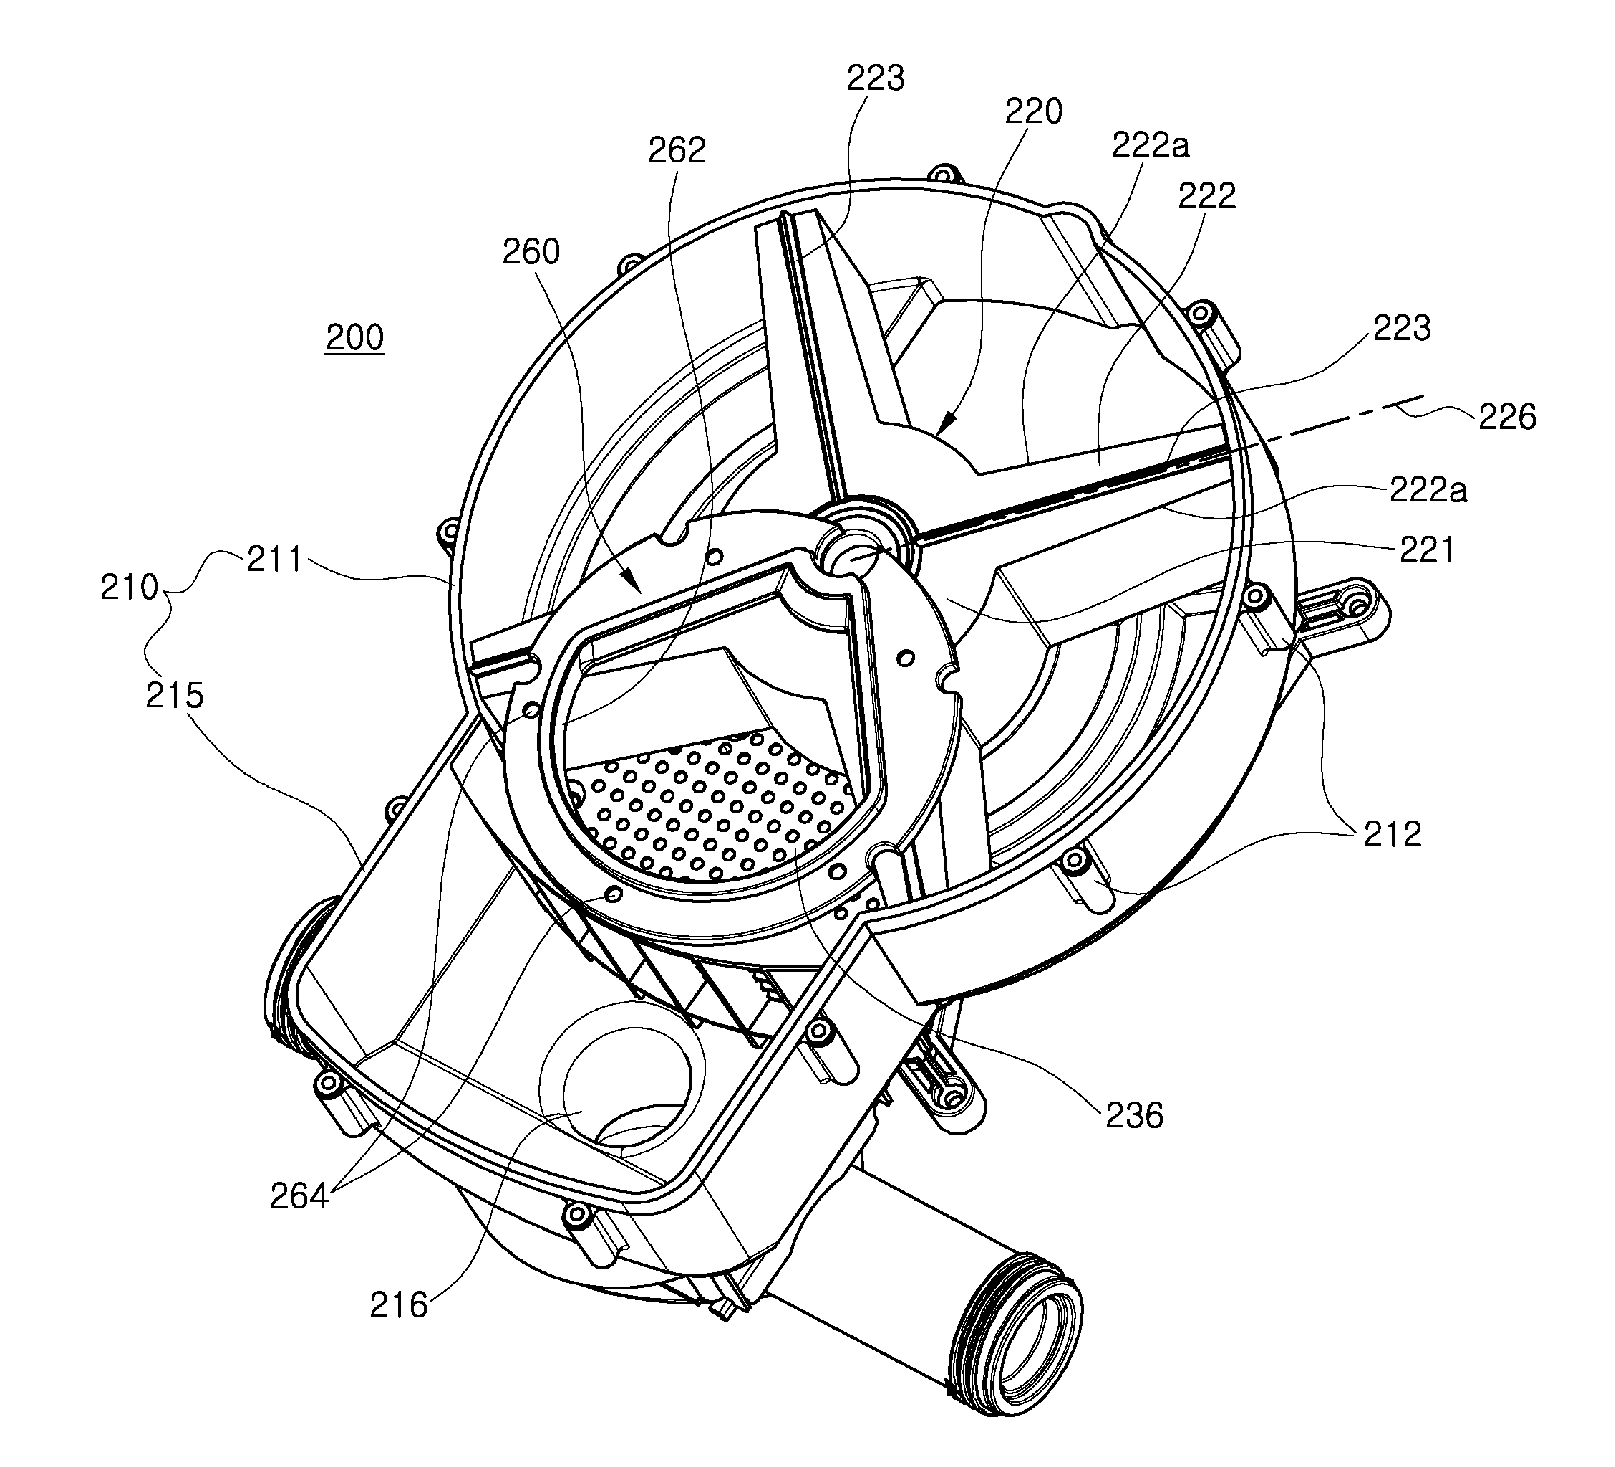 Transfer unit having transfer rotor and food waste treatment apparatus using the same